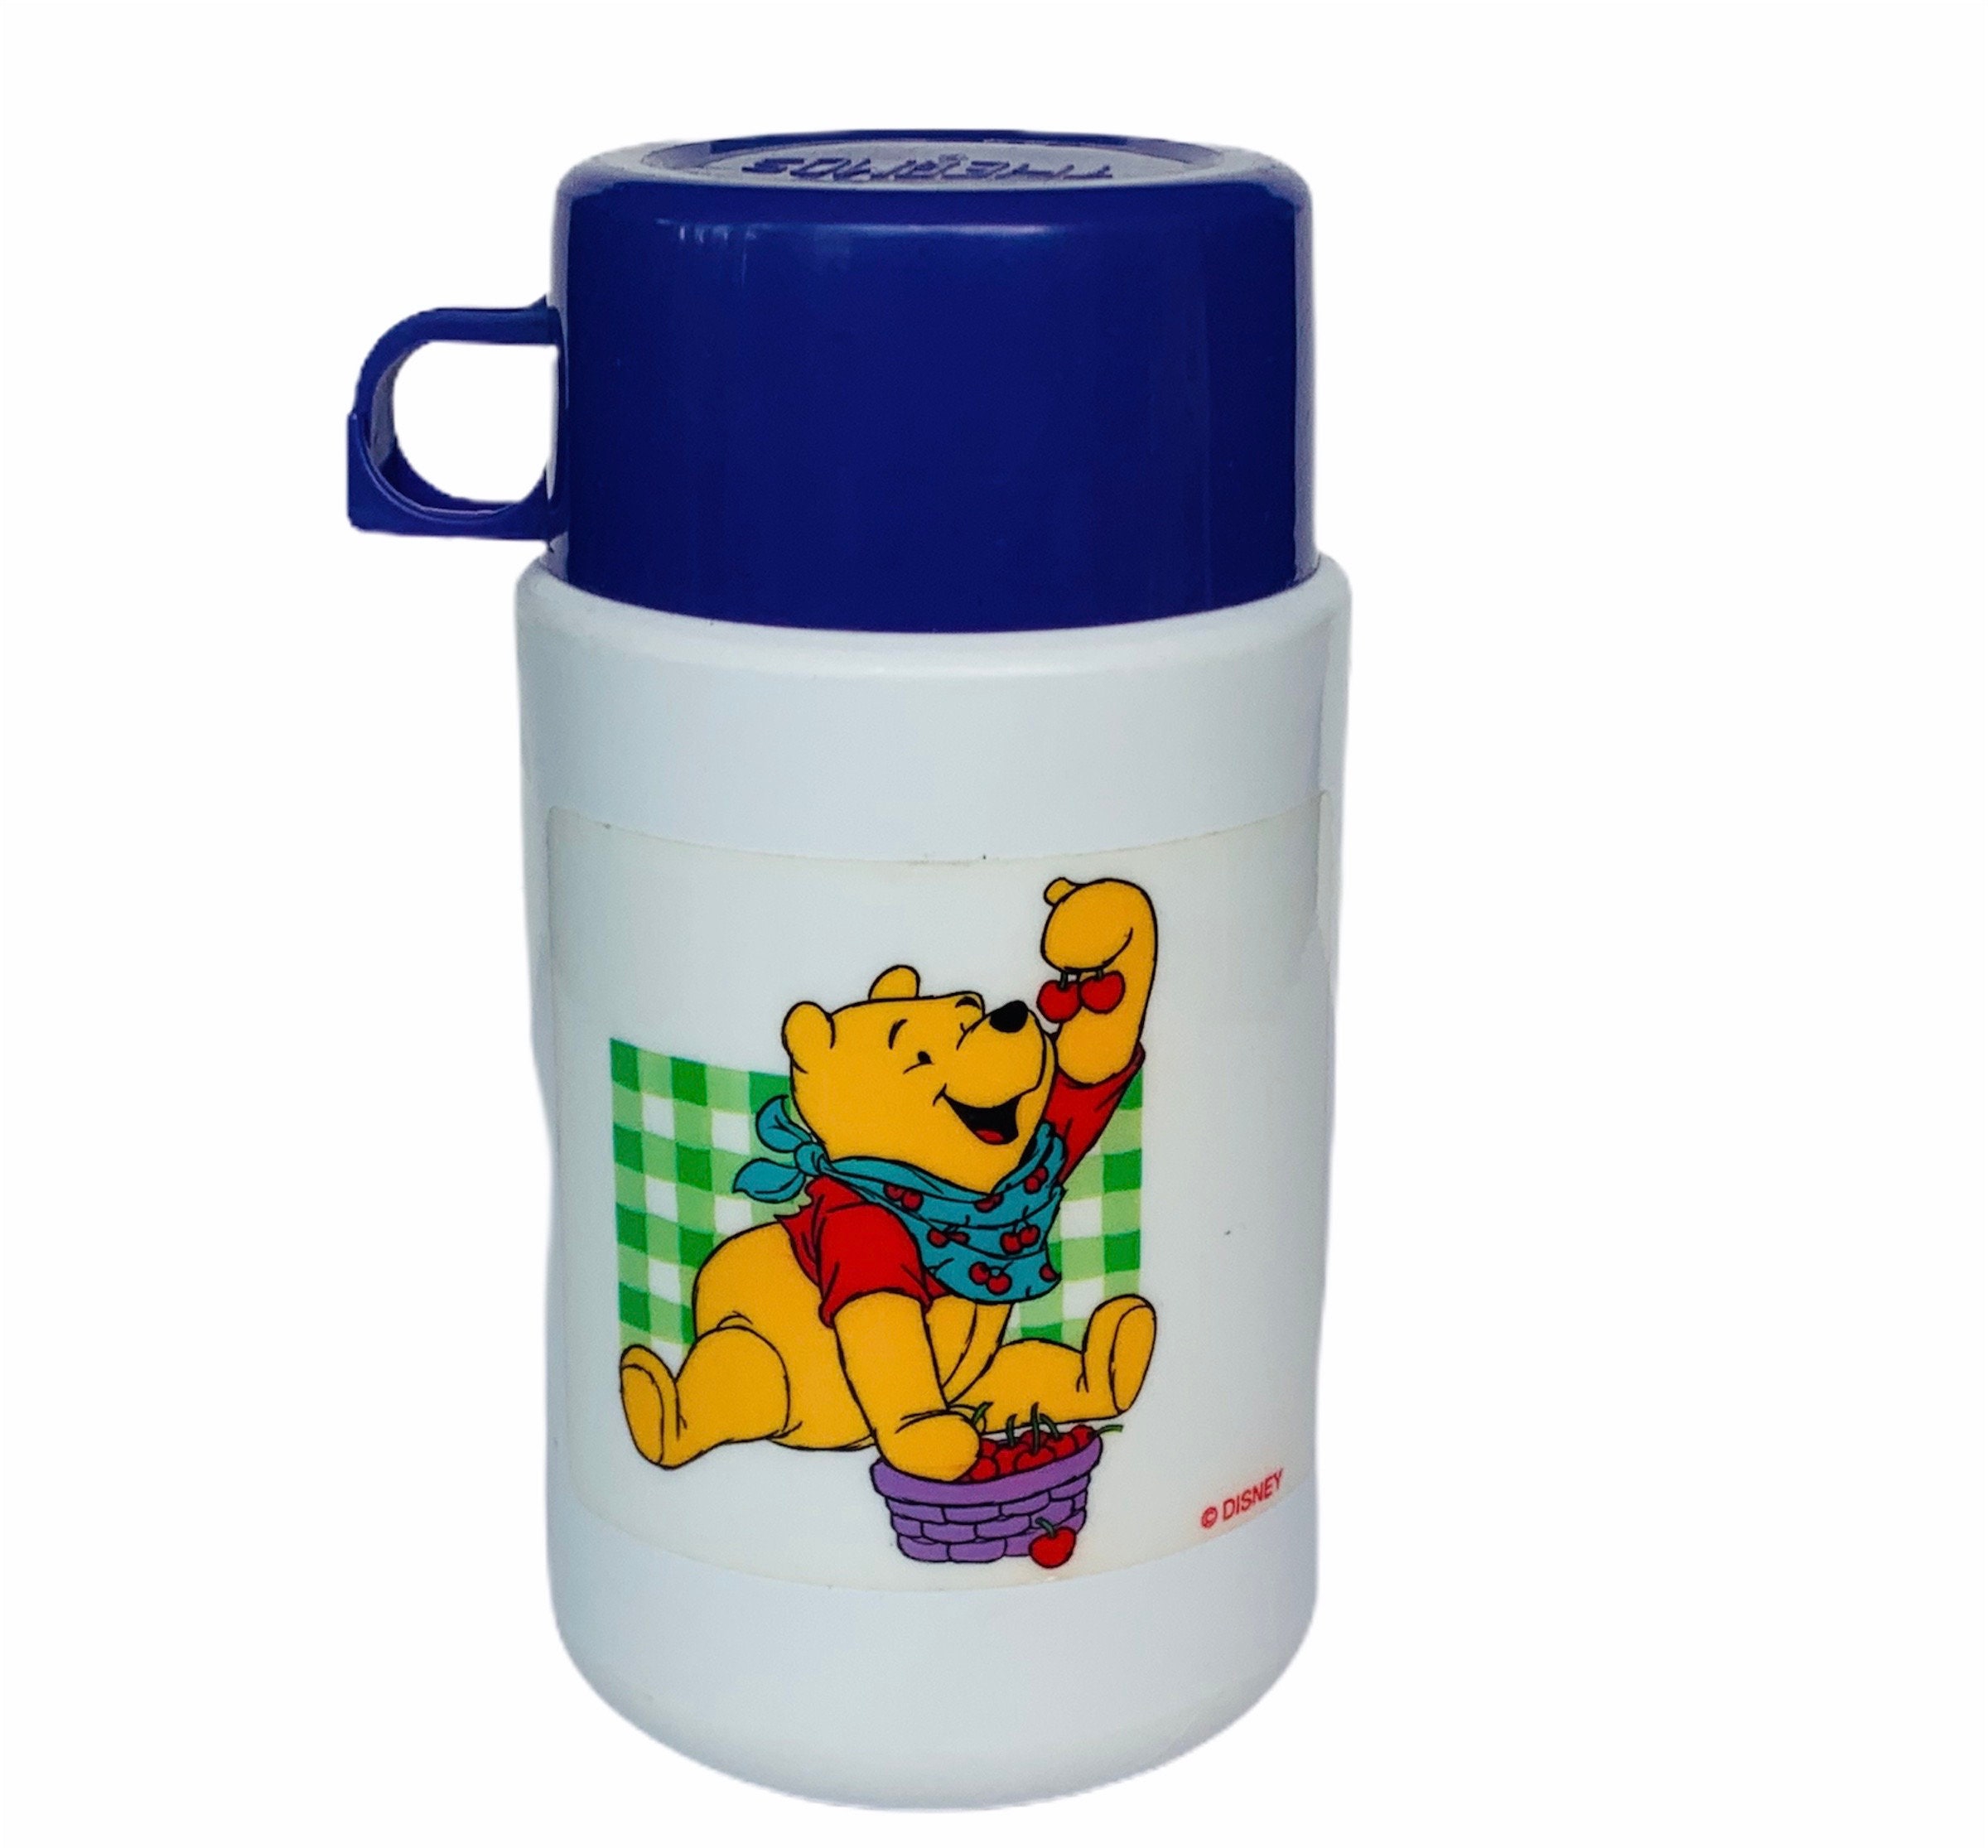 Retro Tom and Jerry Thermos, Aladdin Industries Vacuum Flask, Traveling  Bottle, Small Coffee Thermos, Cartoon Memorabilia, Vintage Gift 